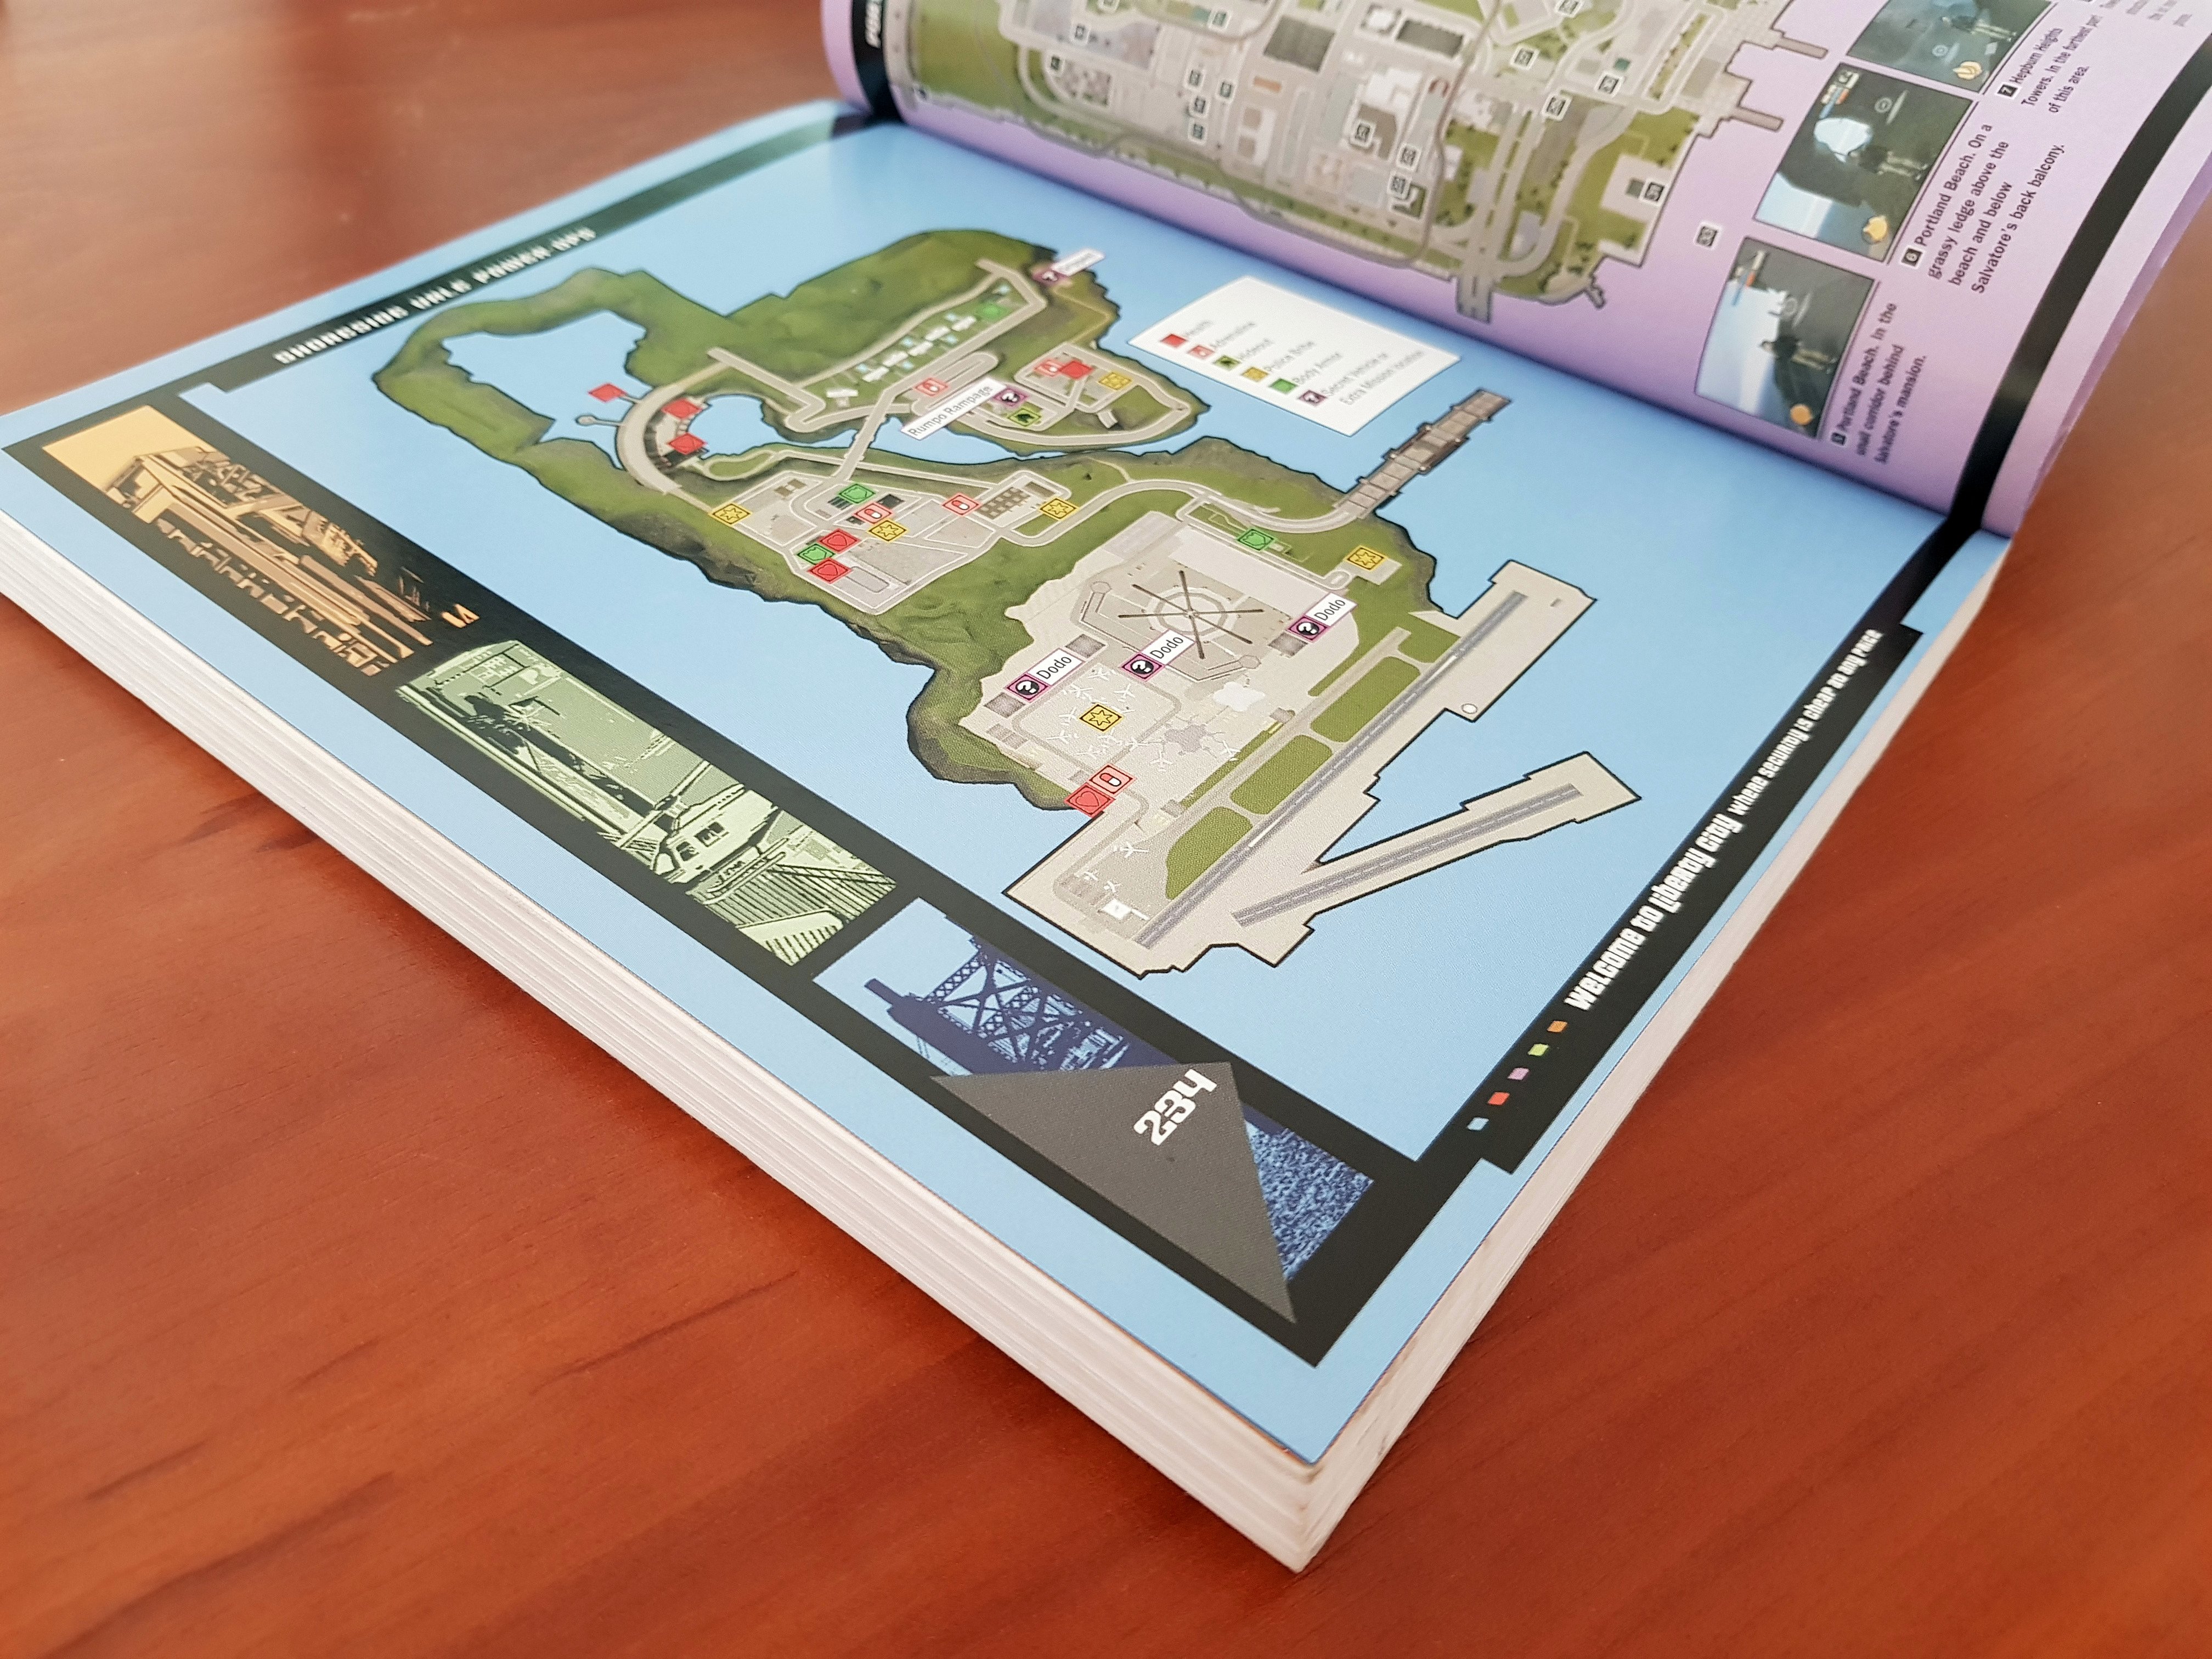 Vadim M. on X: Do we have someone here who has or knows about this  mysterious GTA 3 Bradygames guide? It looks to be an older version of the  map from the